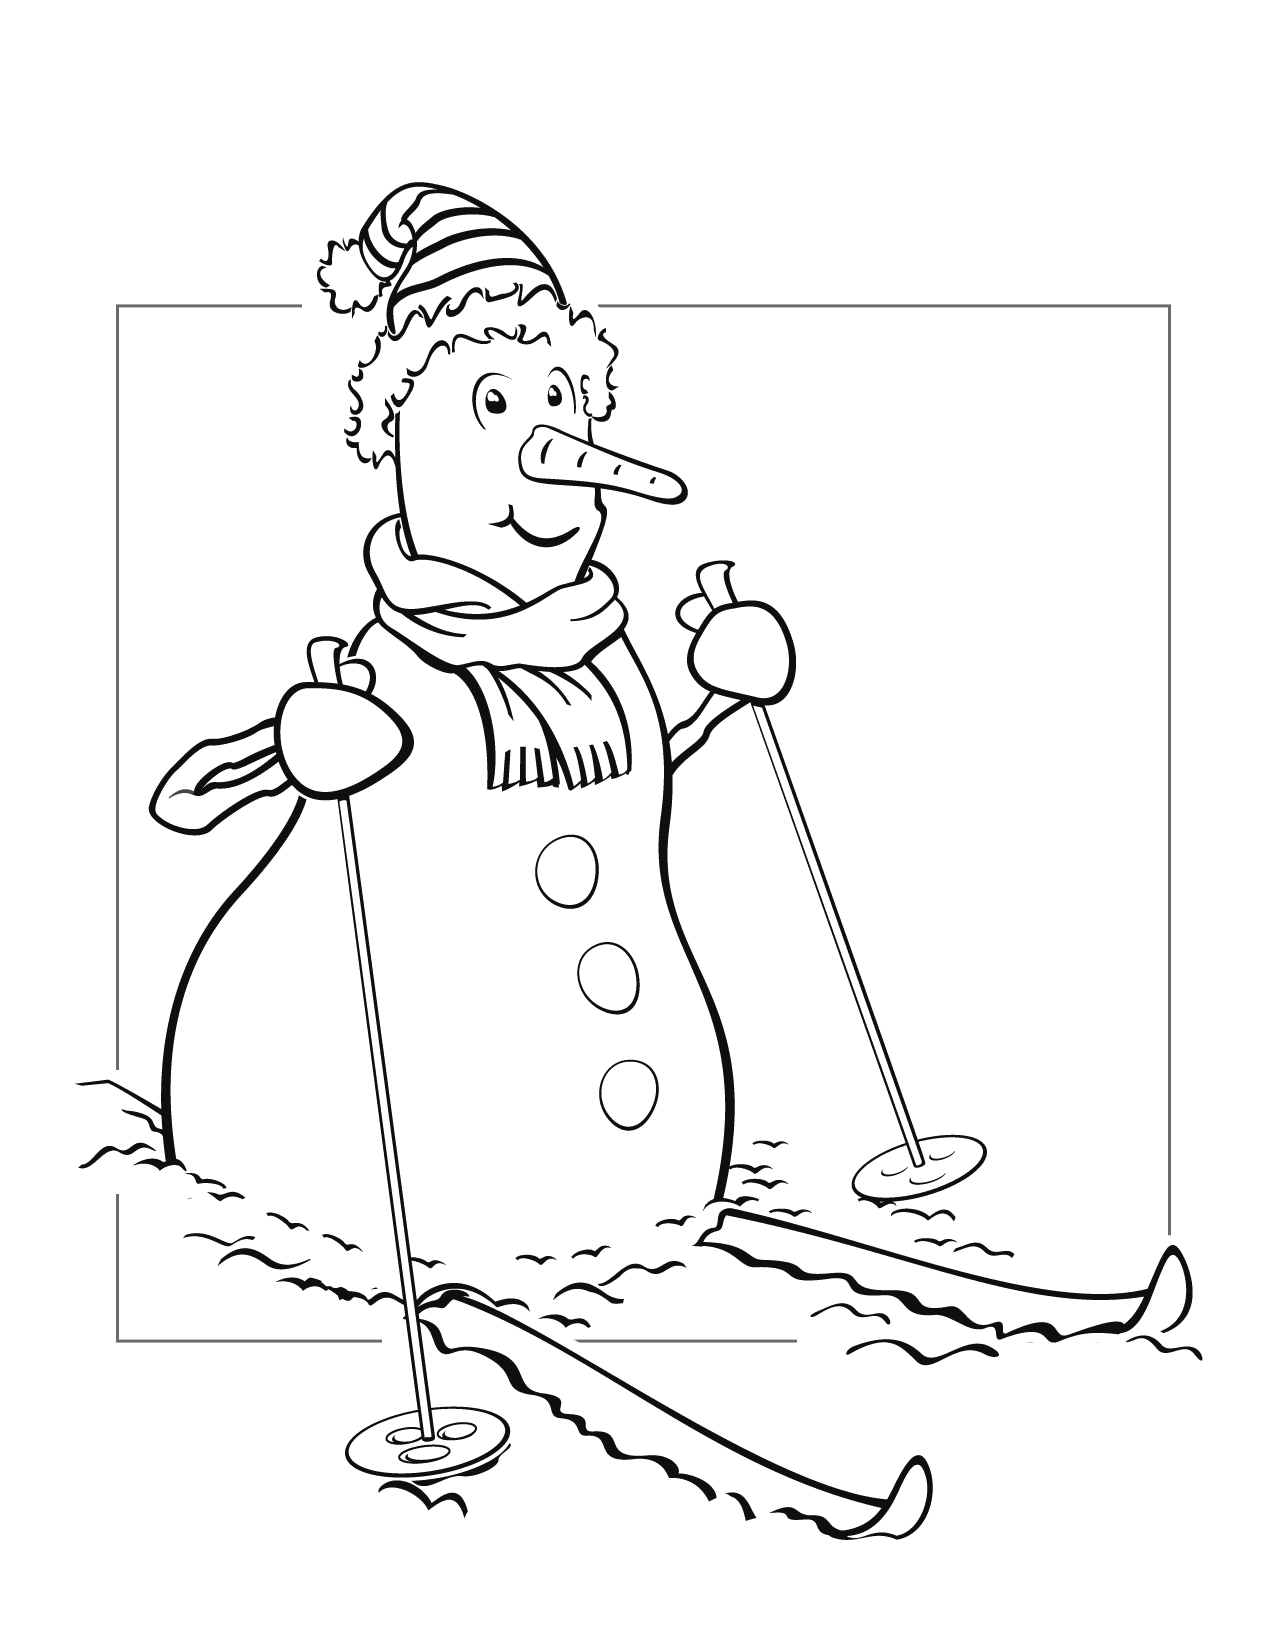 Skiing Snowman Coloring Page